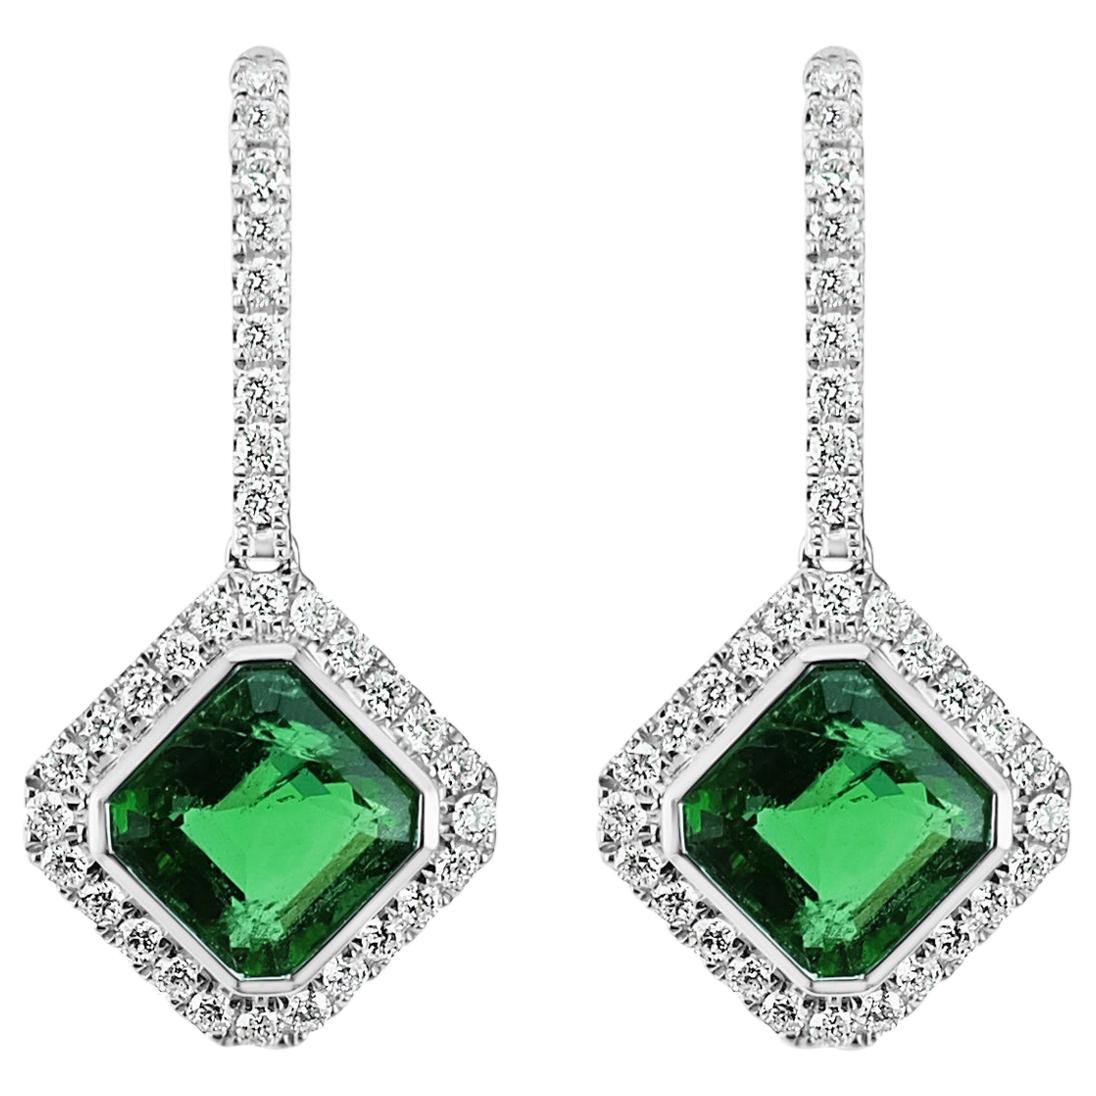 NGTC Certified 3.73 Carat Green Emerald and Diamond Classical Dangle Earring For Sale